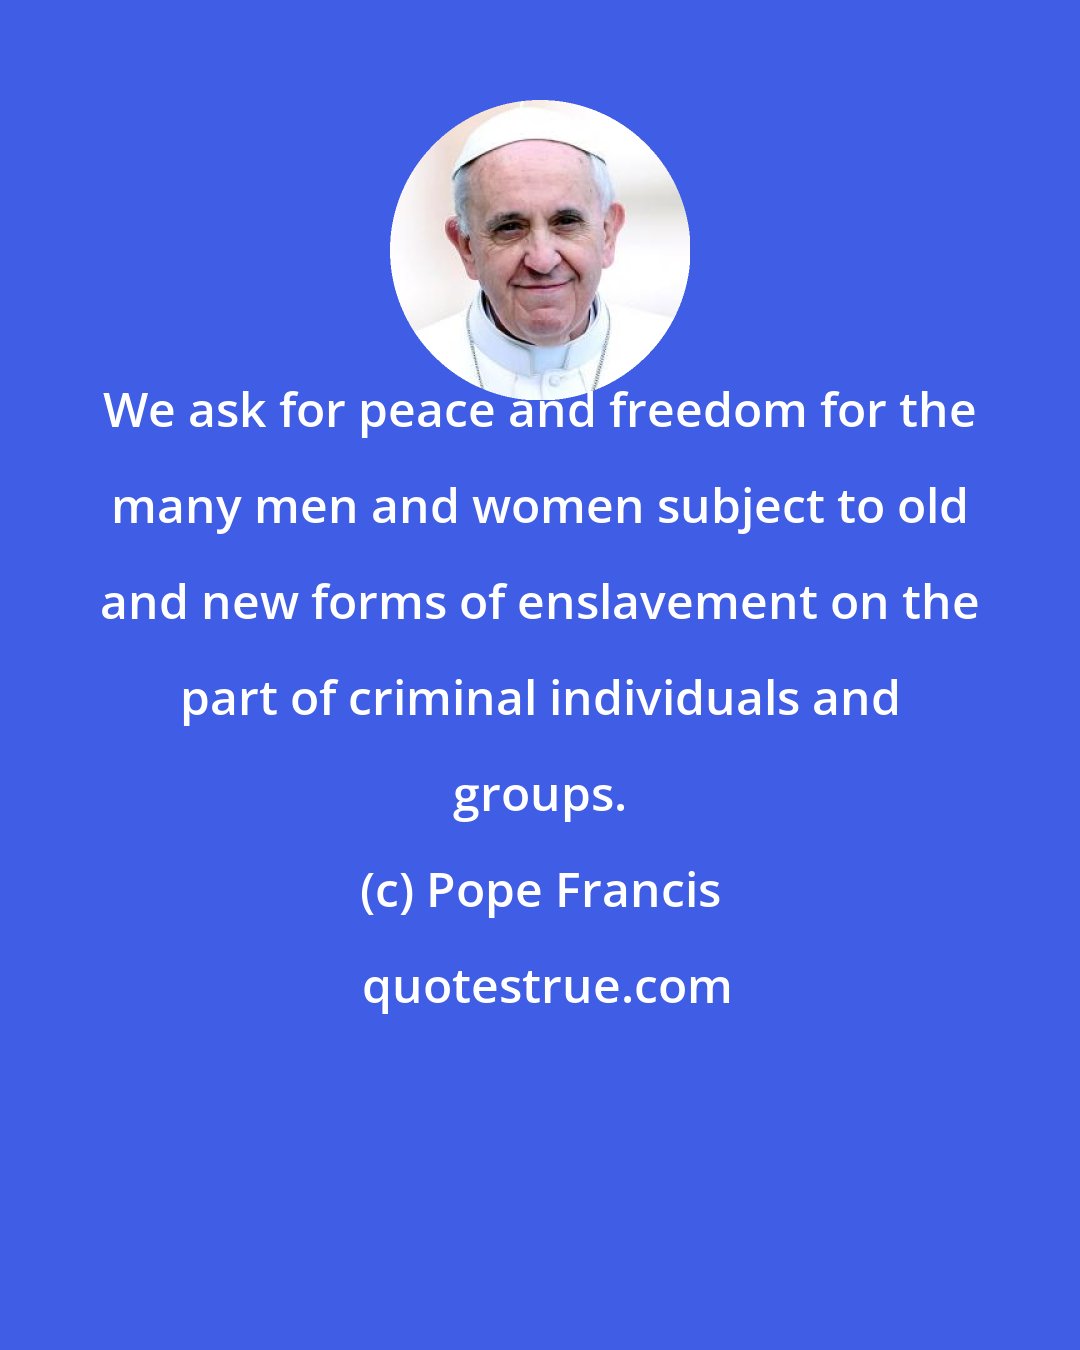 Pope Francis: We ask for peace and freedom for the many men and women subject to old and new forms of enslavement on the part of criminal individuals and groups.